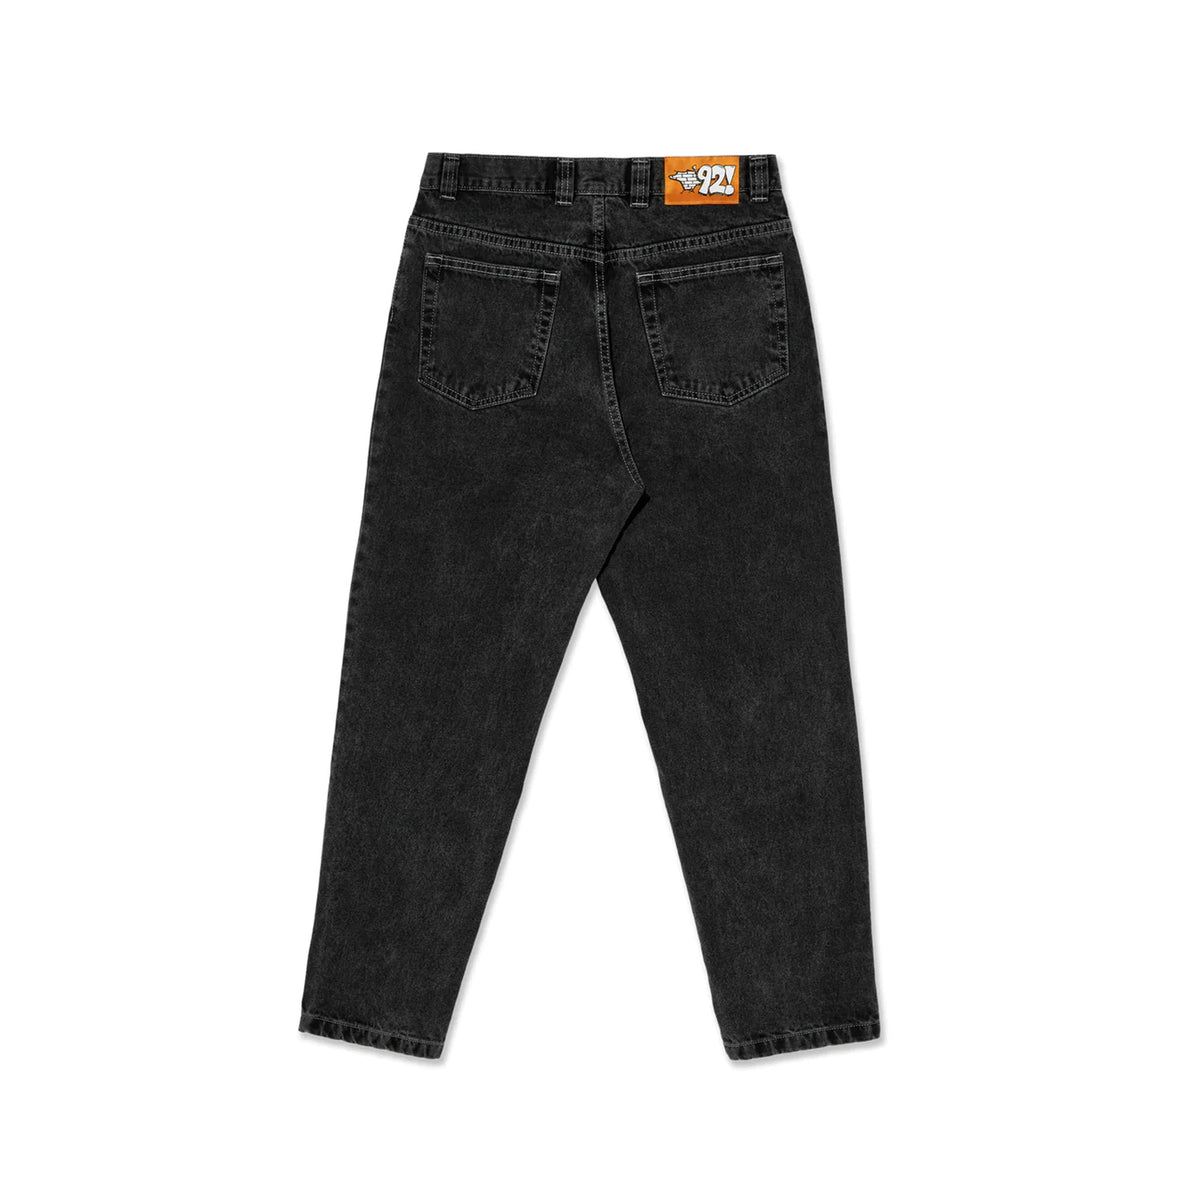 Find 92 Denim Jeans Polar Skate Co X for sale at very low costs